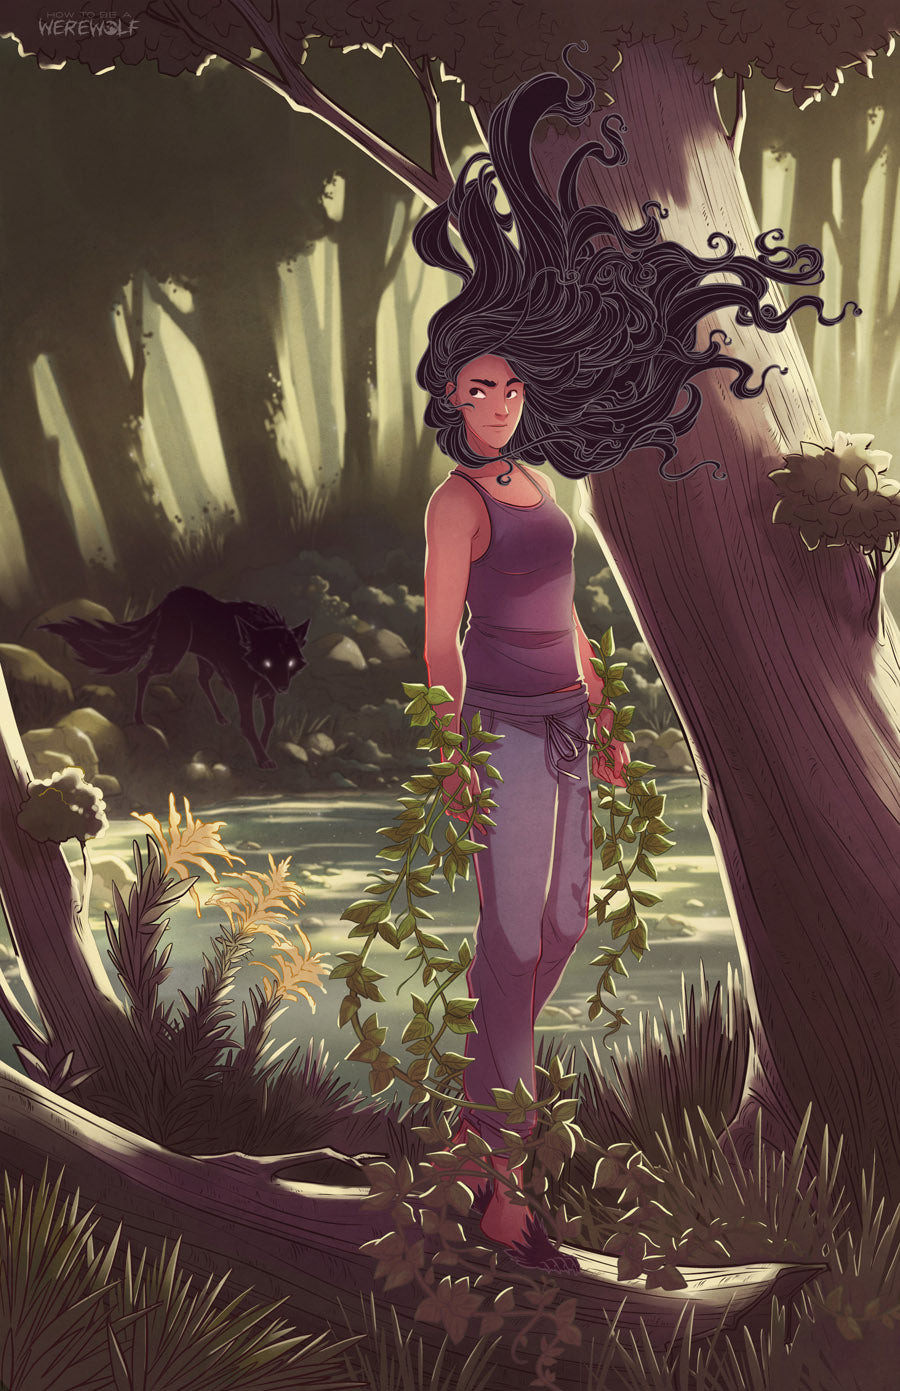 Chapter 10 Cover Print from How To Be a Werewolf - Webcomic Merchandise 